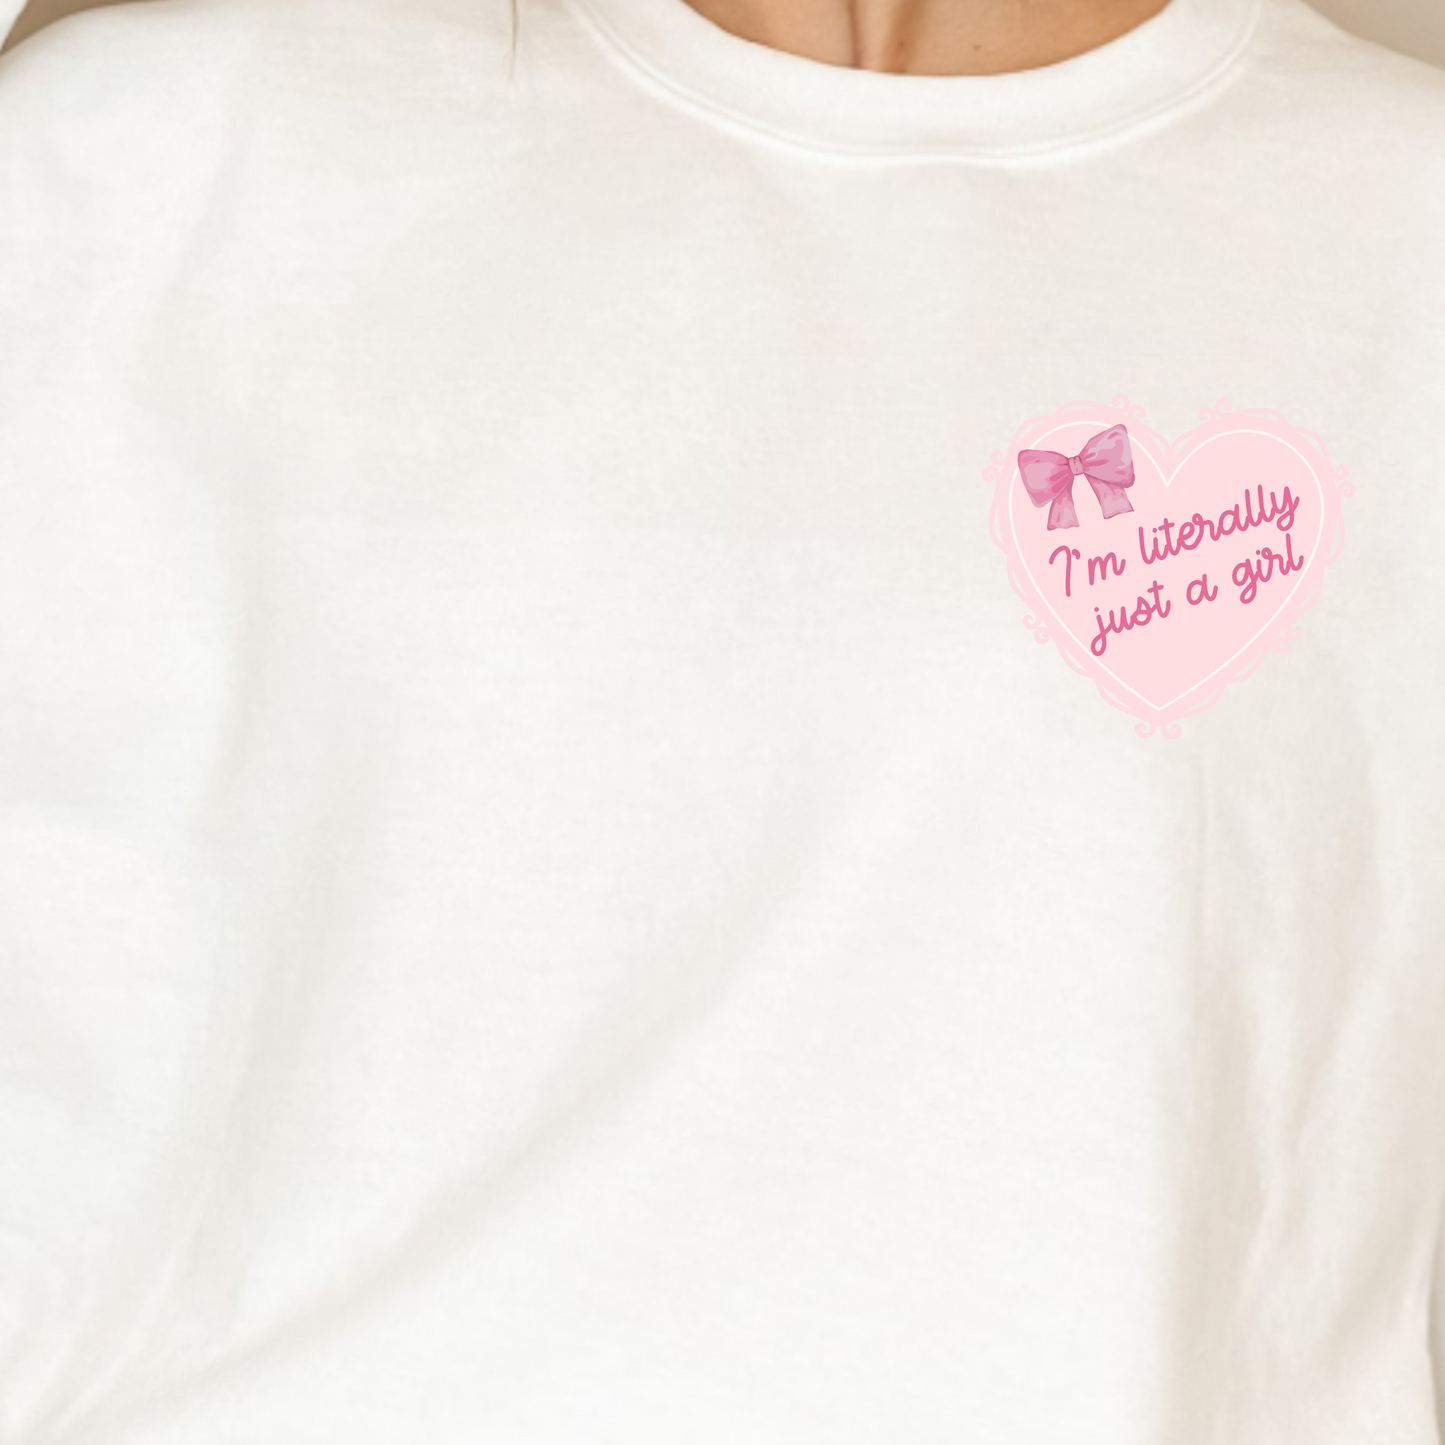 (Shirt not included) Literally Just a Girl Heart POCKET -  Matte Clear Film Transfer